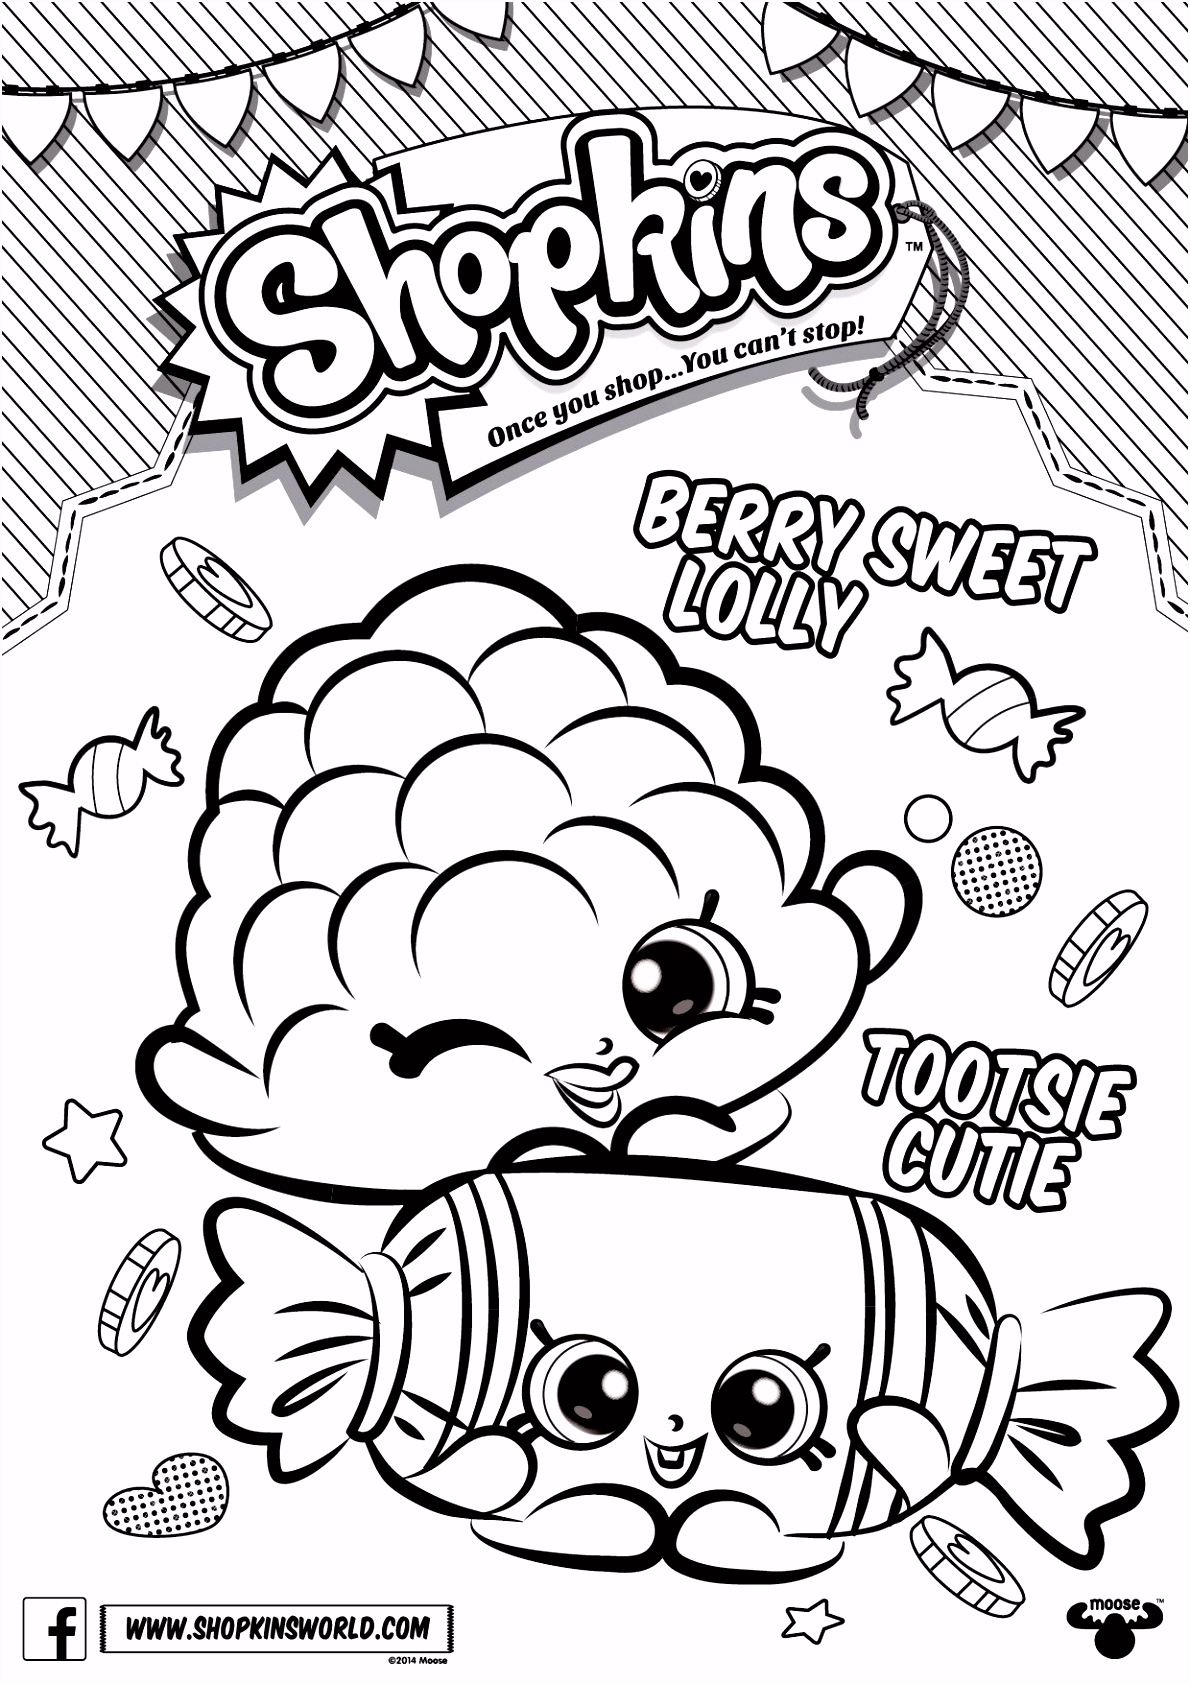 S Hopkins Coloring Pages Printable petkins Pinterest